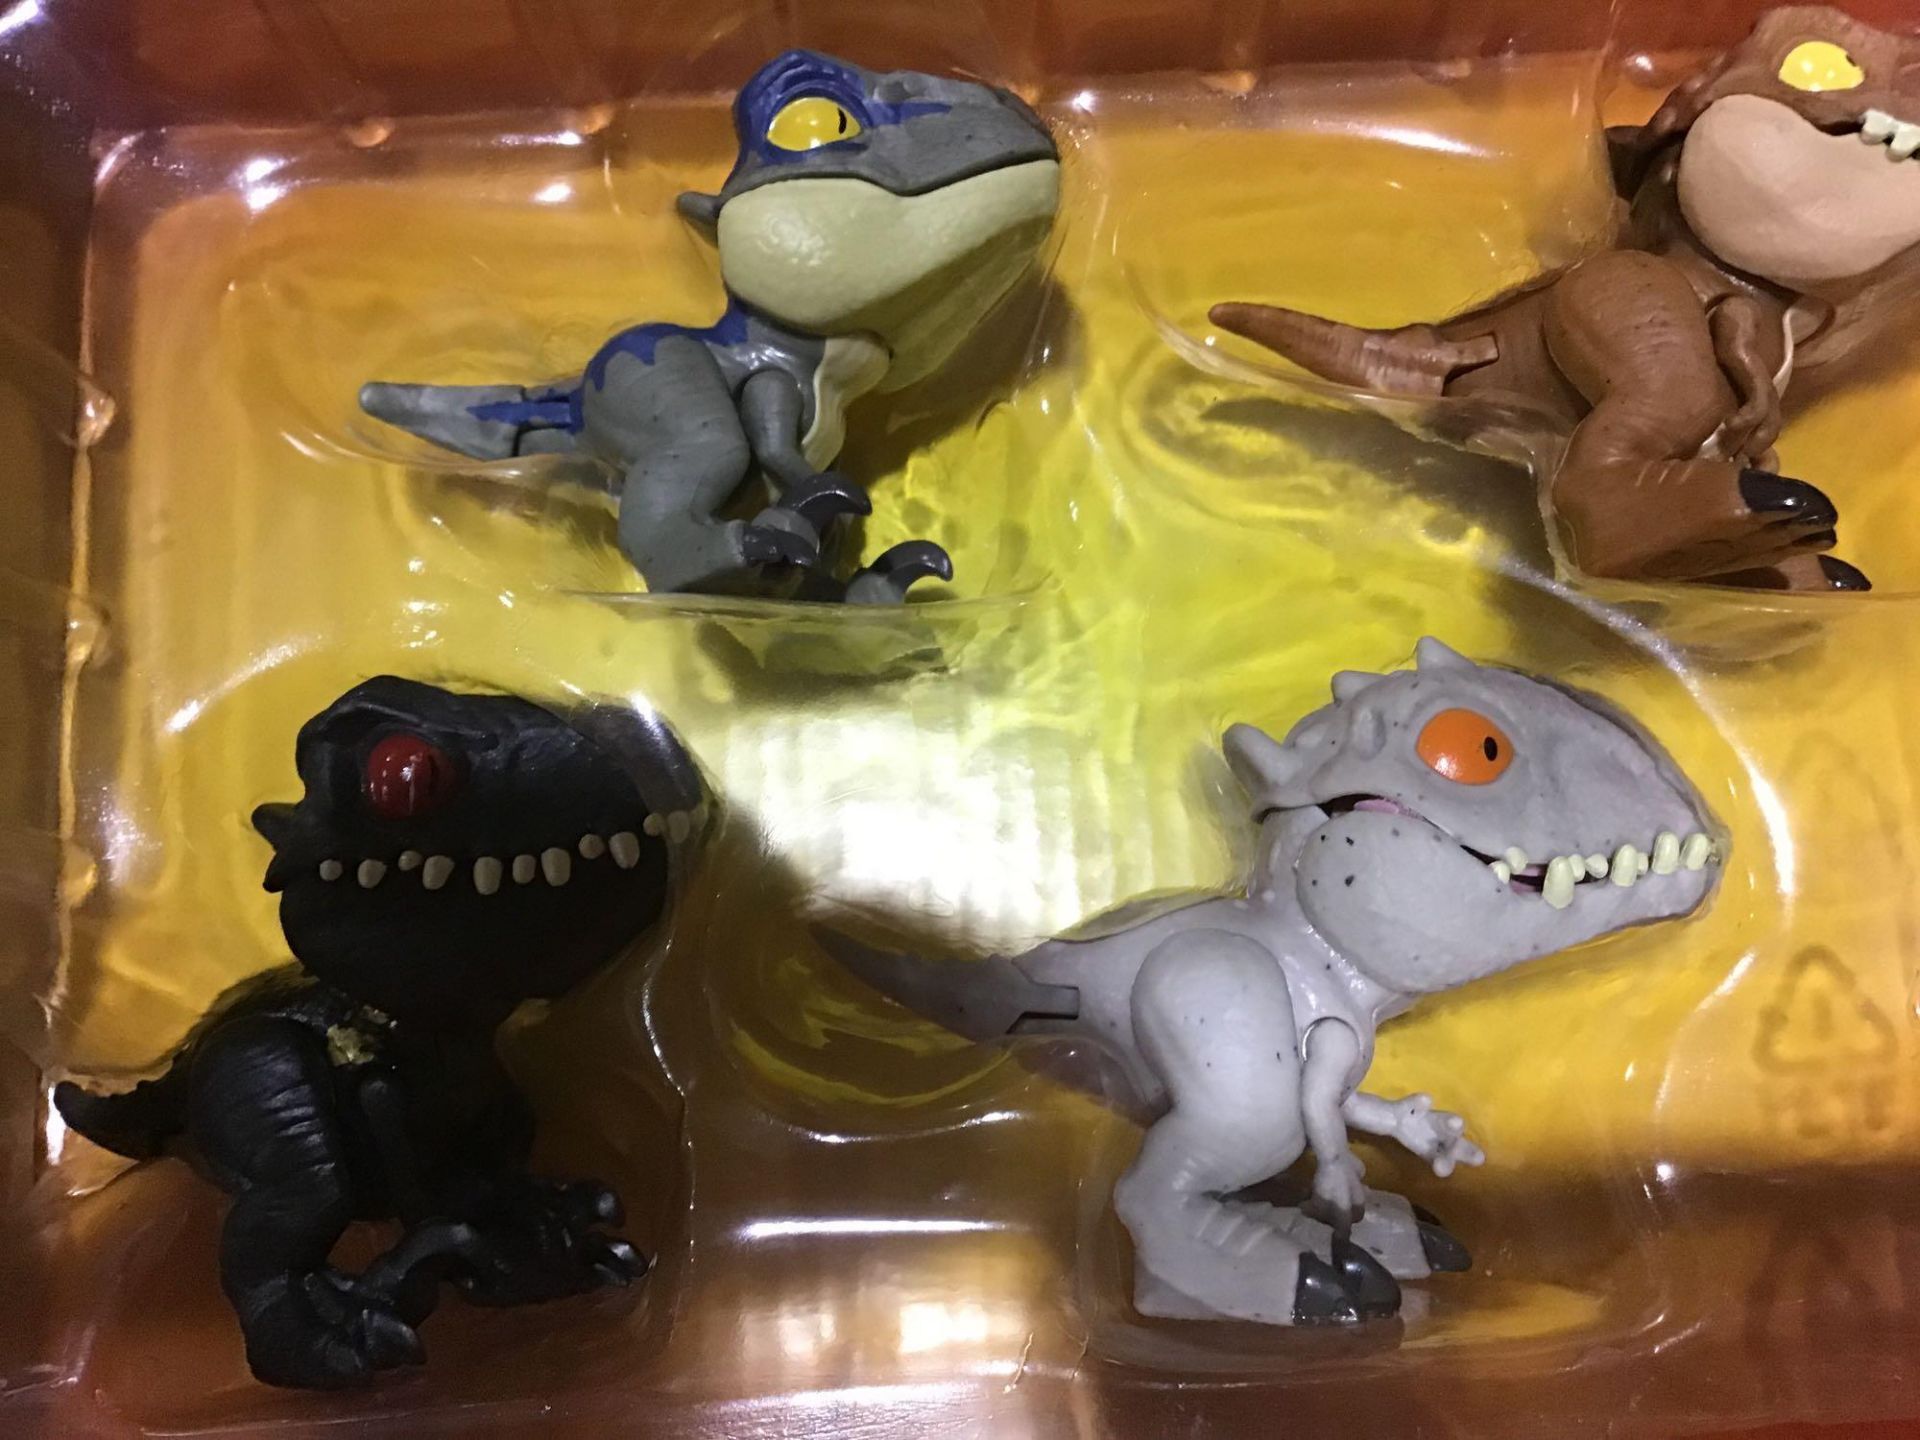 Jurassic World Dinosaur Snap Squad Collectibles for Display, Play and Snap On Feature - Image 2 of 4